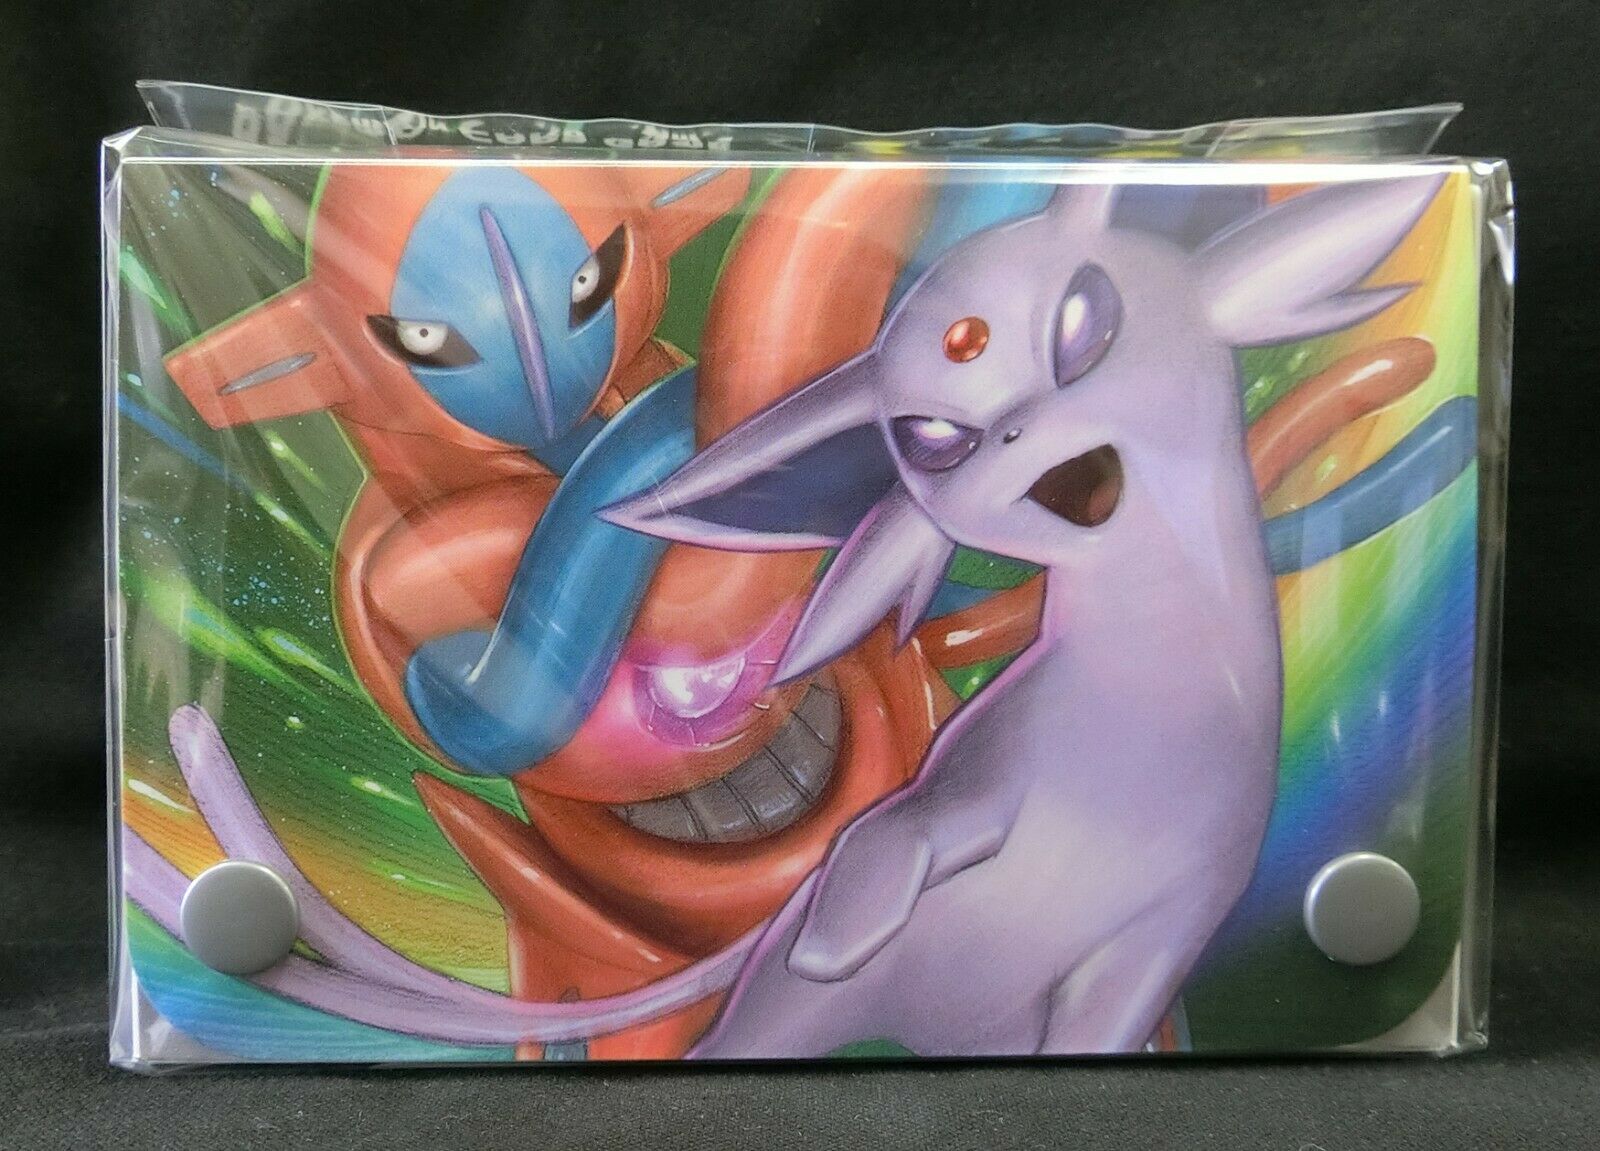 Sun & Moon Unified Minds Pokemon Sleeved Sealed Booster Pack Deoxys Espeon